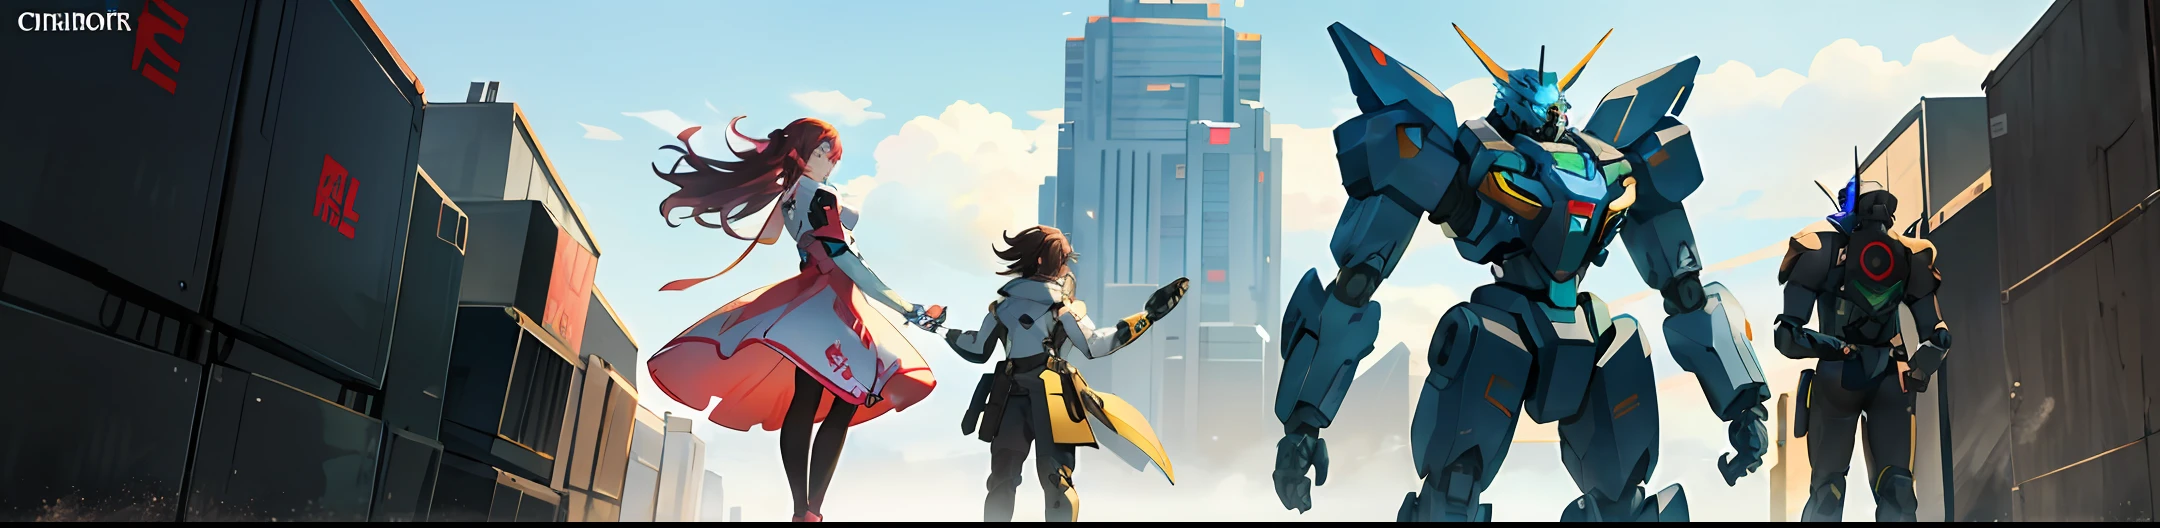 A woman in a pink dress stands on the shoulders of a giant robot，Trends on CGiStationecha network armor girl，cyberpunk anime girls mecha，anime mecha aesthetic，d。VA from Overwatch，Chrono Fortress style，Anime manga robot！animemanga girl, Makoto Shinkai and Artgerm, trending at cgstation, Mobile Suit, Female action anime girl